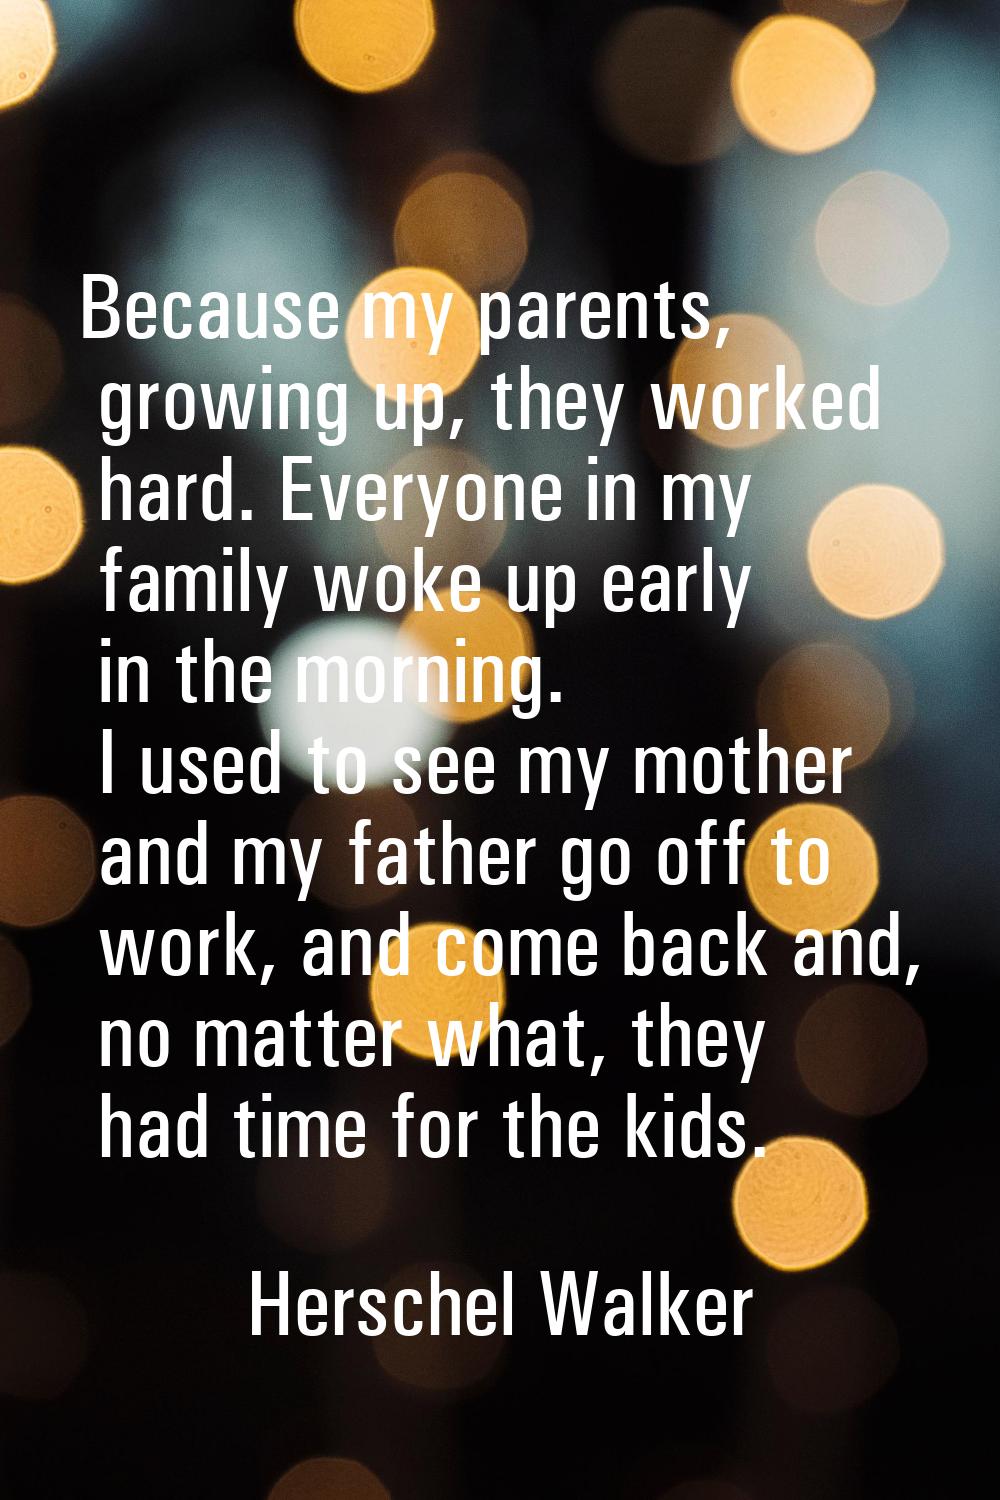 Because my parents, growing up, they worked hard. Everyone in my family woke up early in the mornin